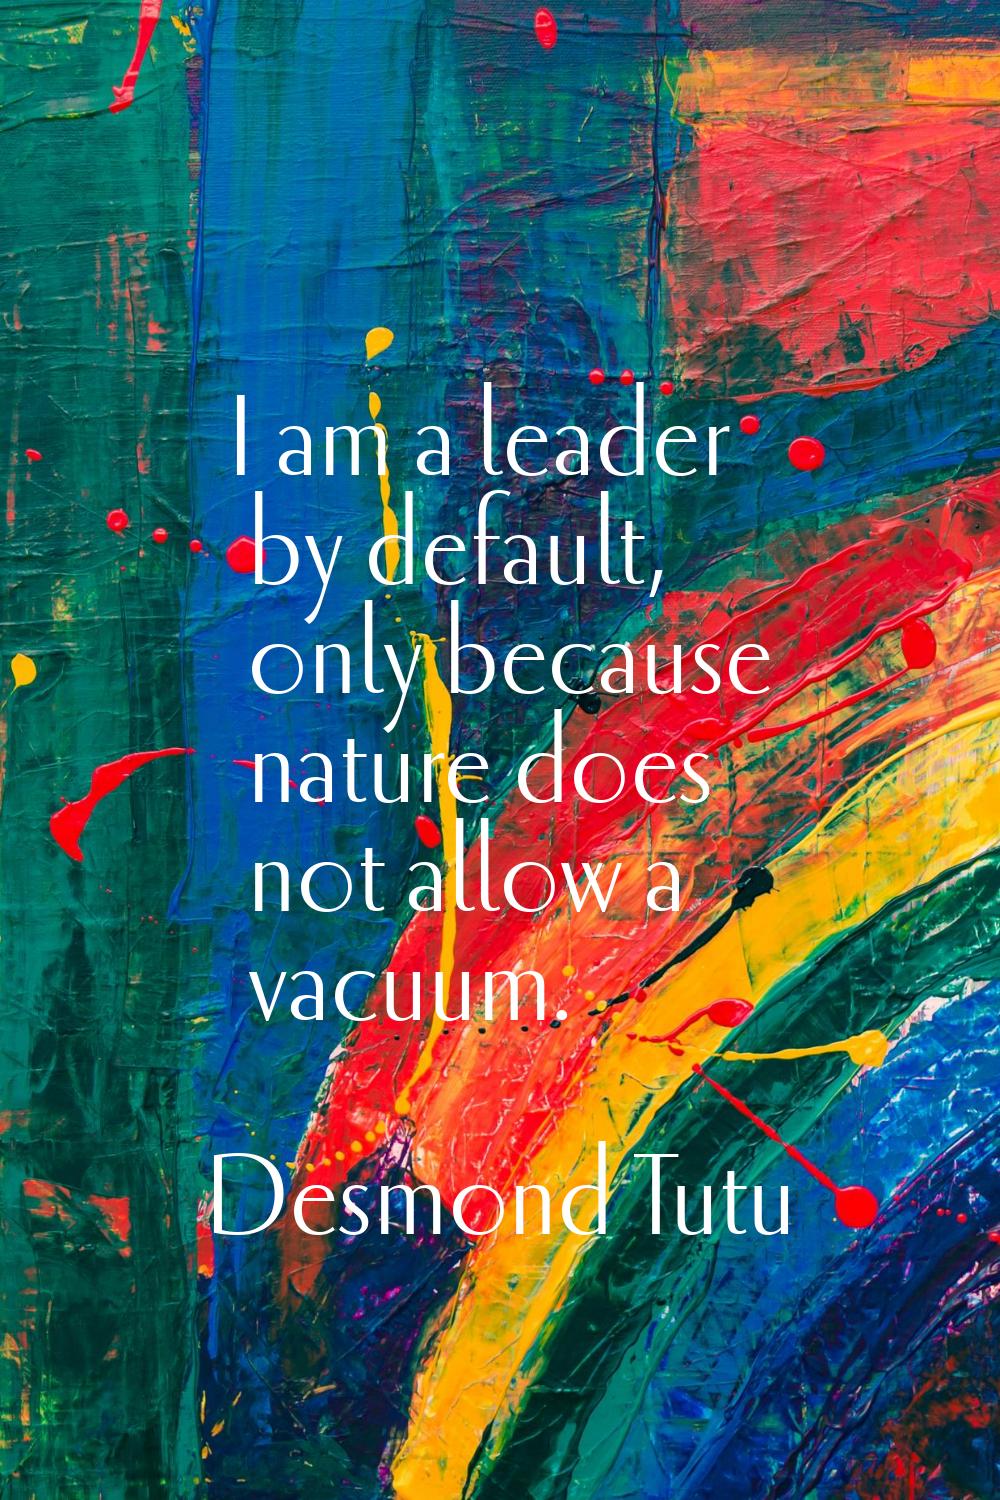 I am a leader by default, only because nature does not allow a vacuum.